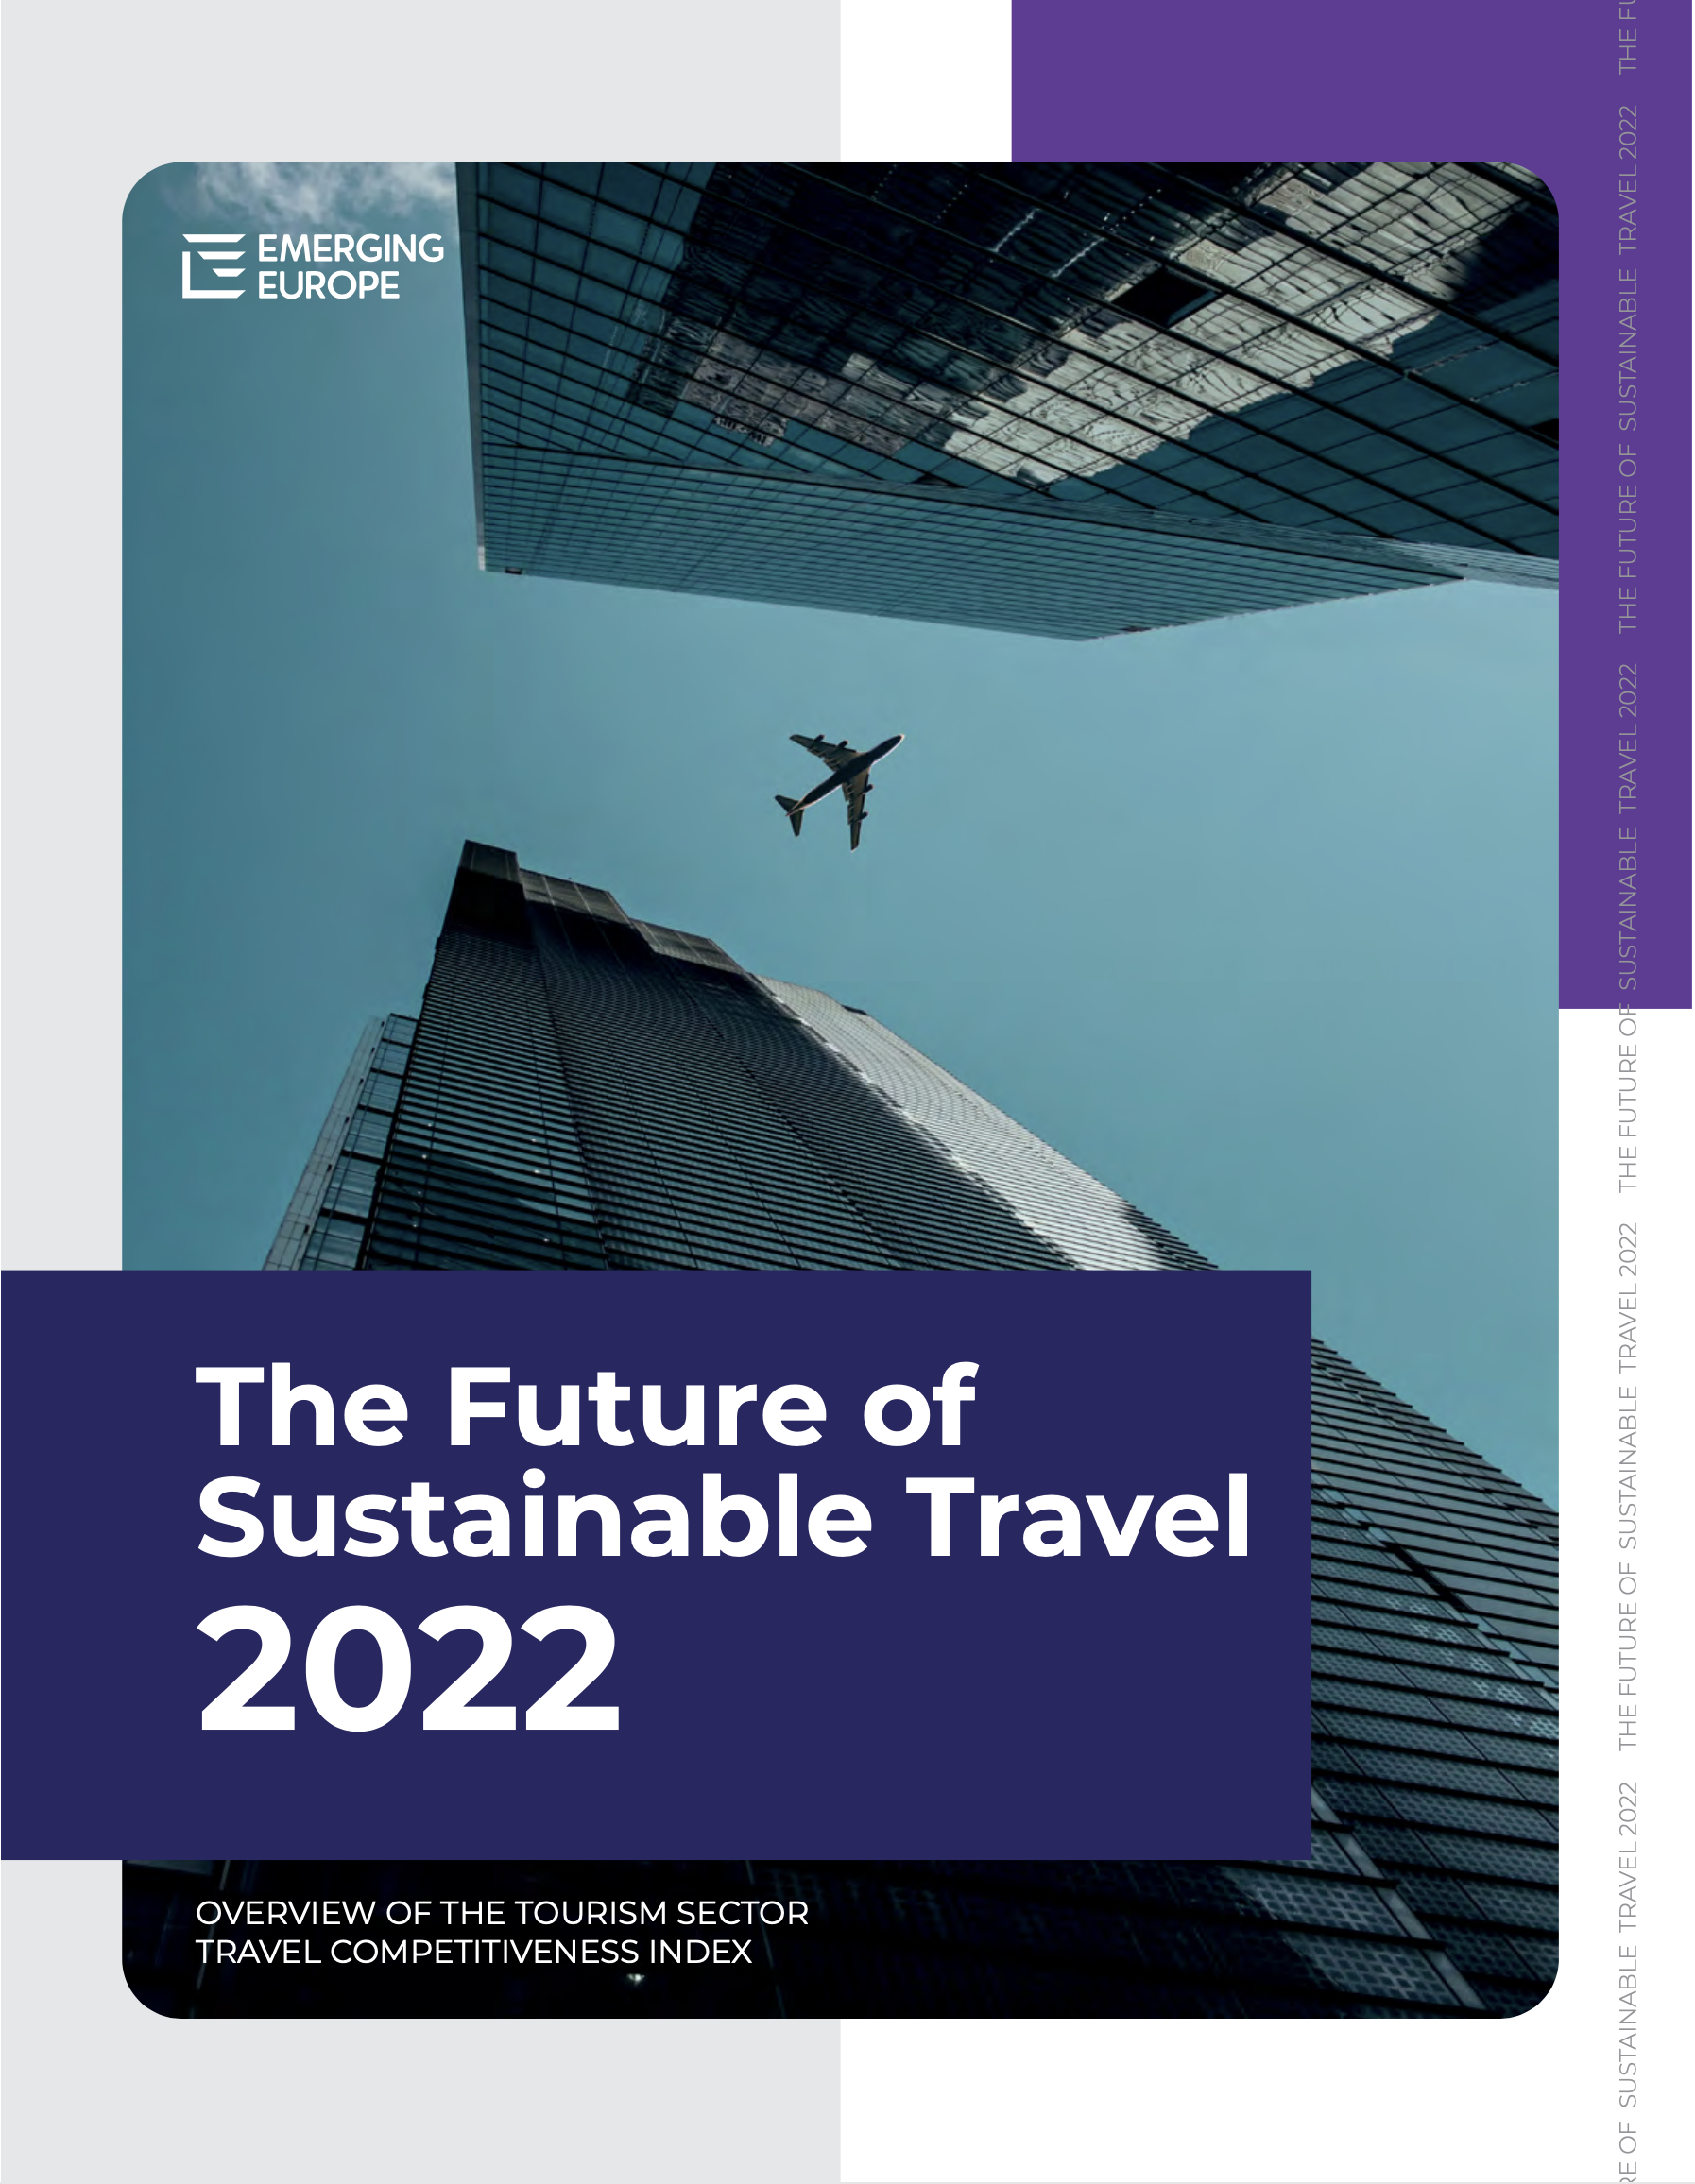 The Future of Sustainable Travel 2022